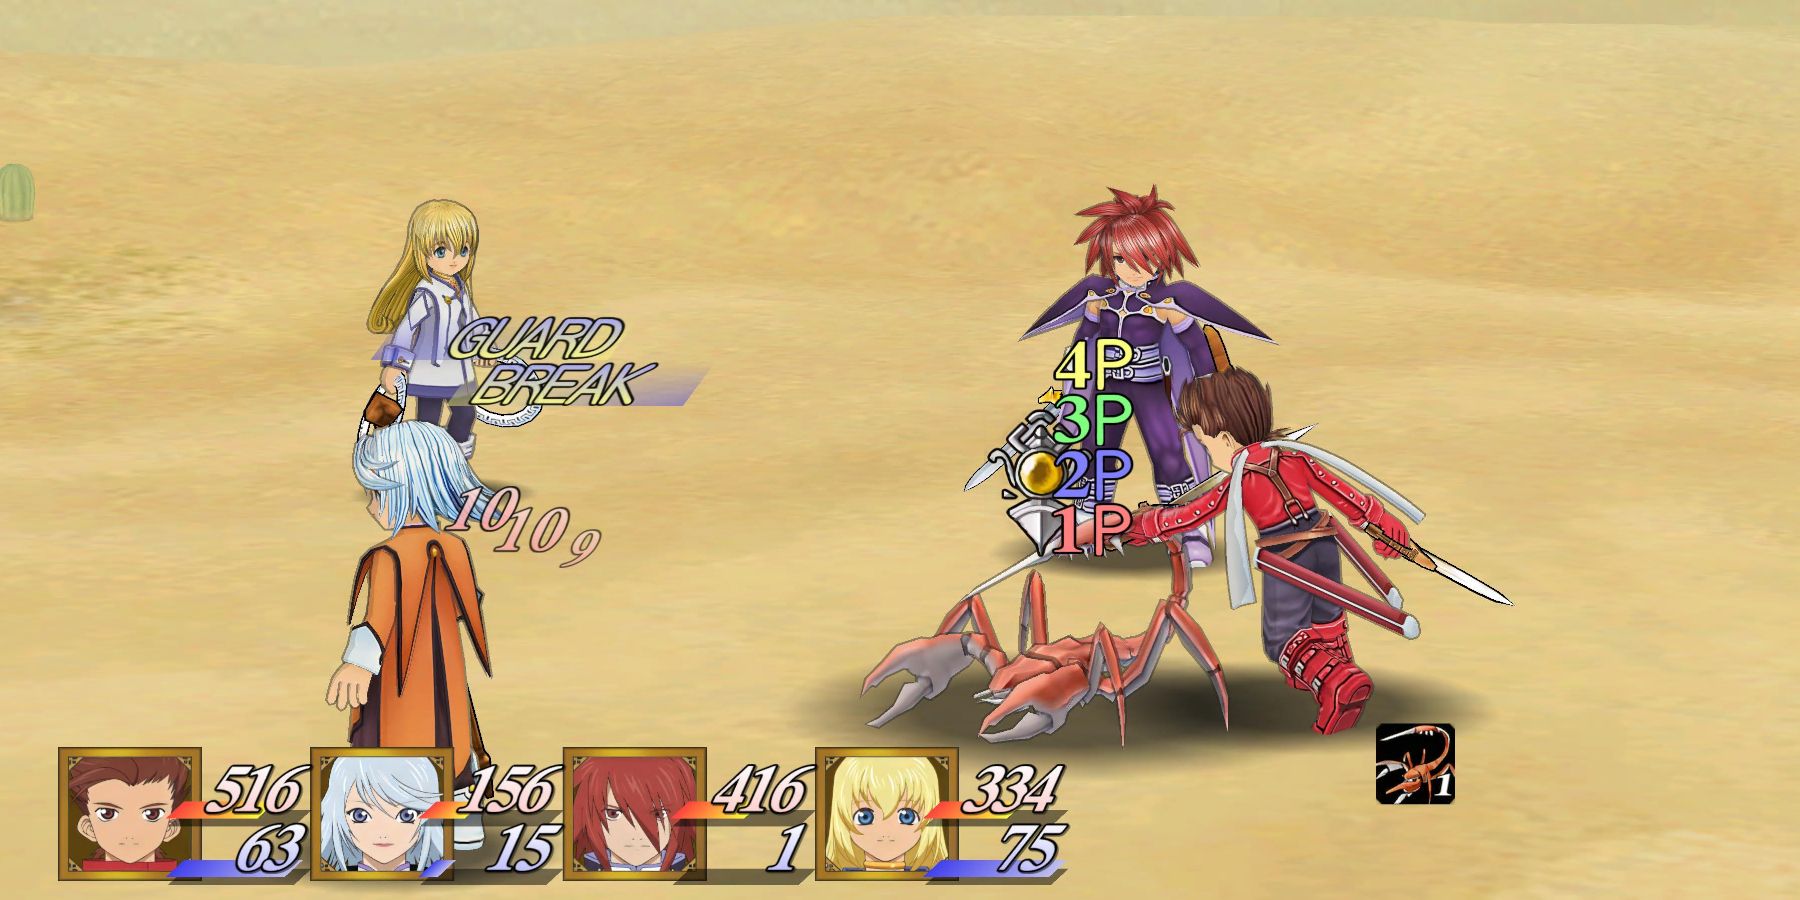 Tales of Symphonia switching back to Lloyd in combat